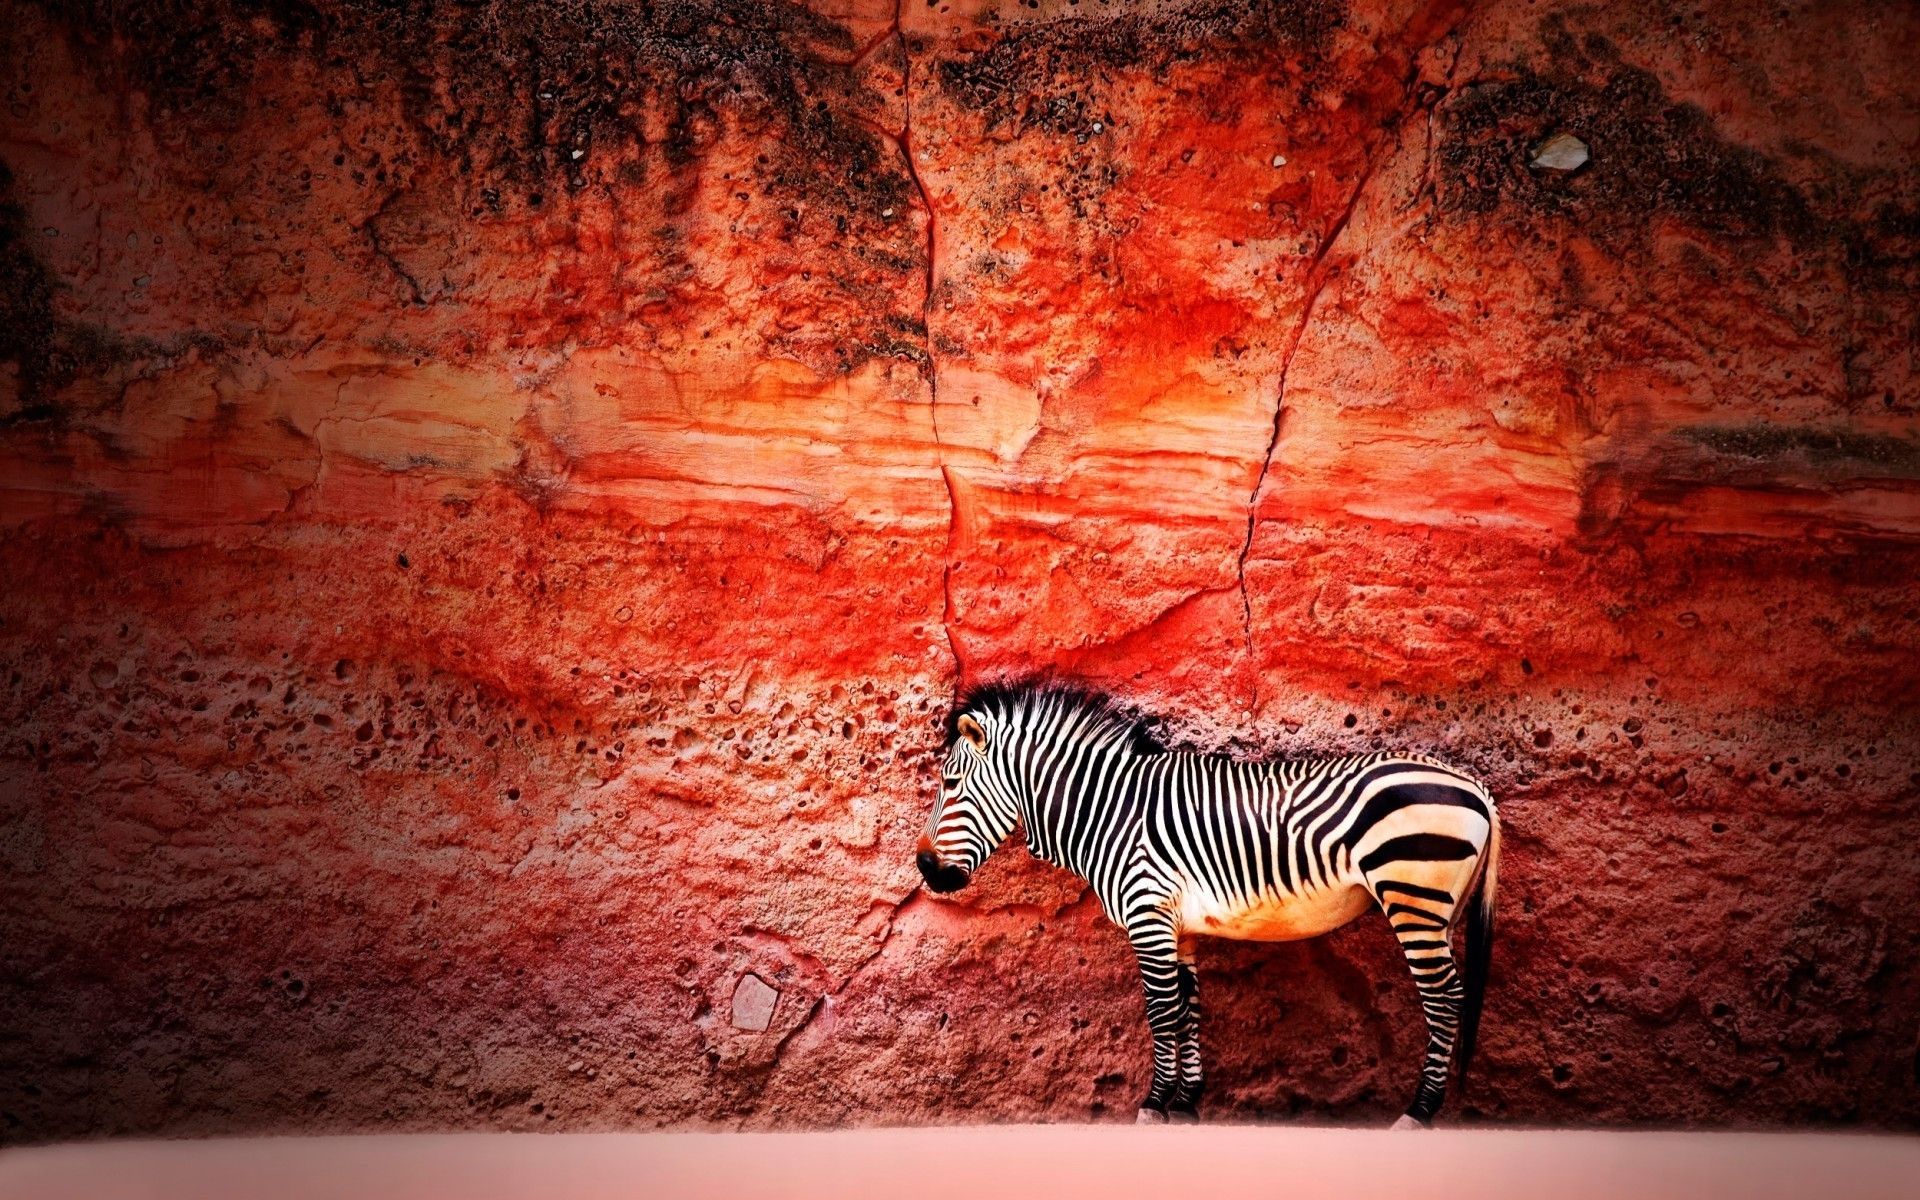 a zebra standing infront of a red wall Image - ID: 292764 - Image Abyss